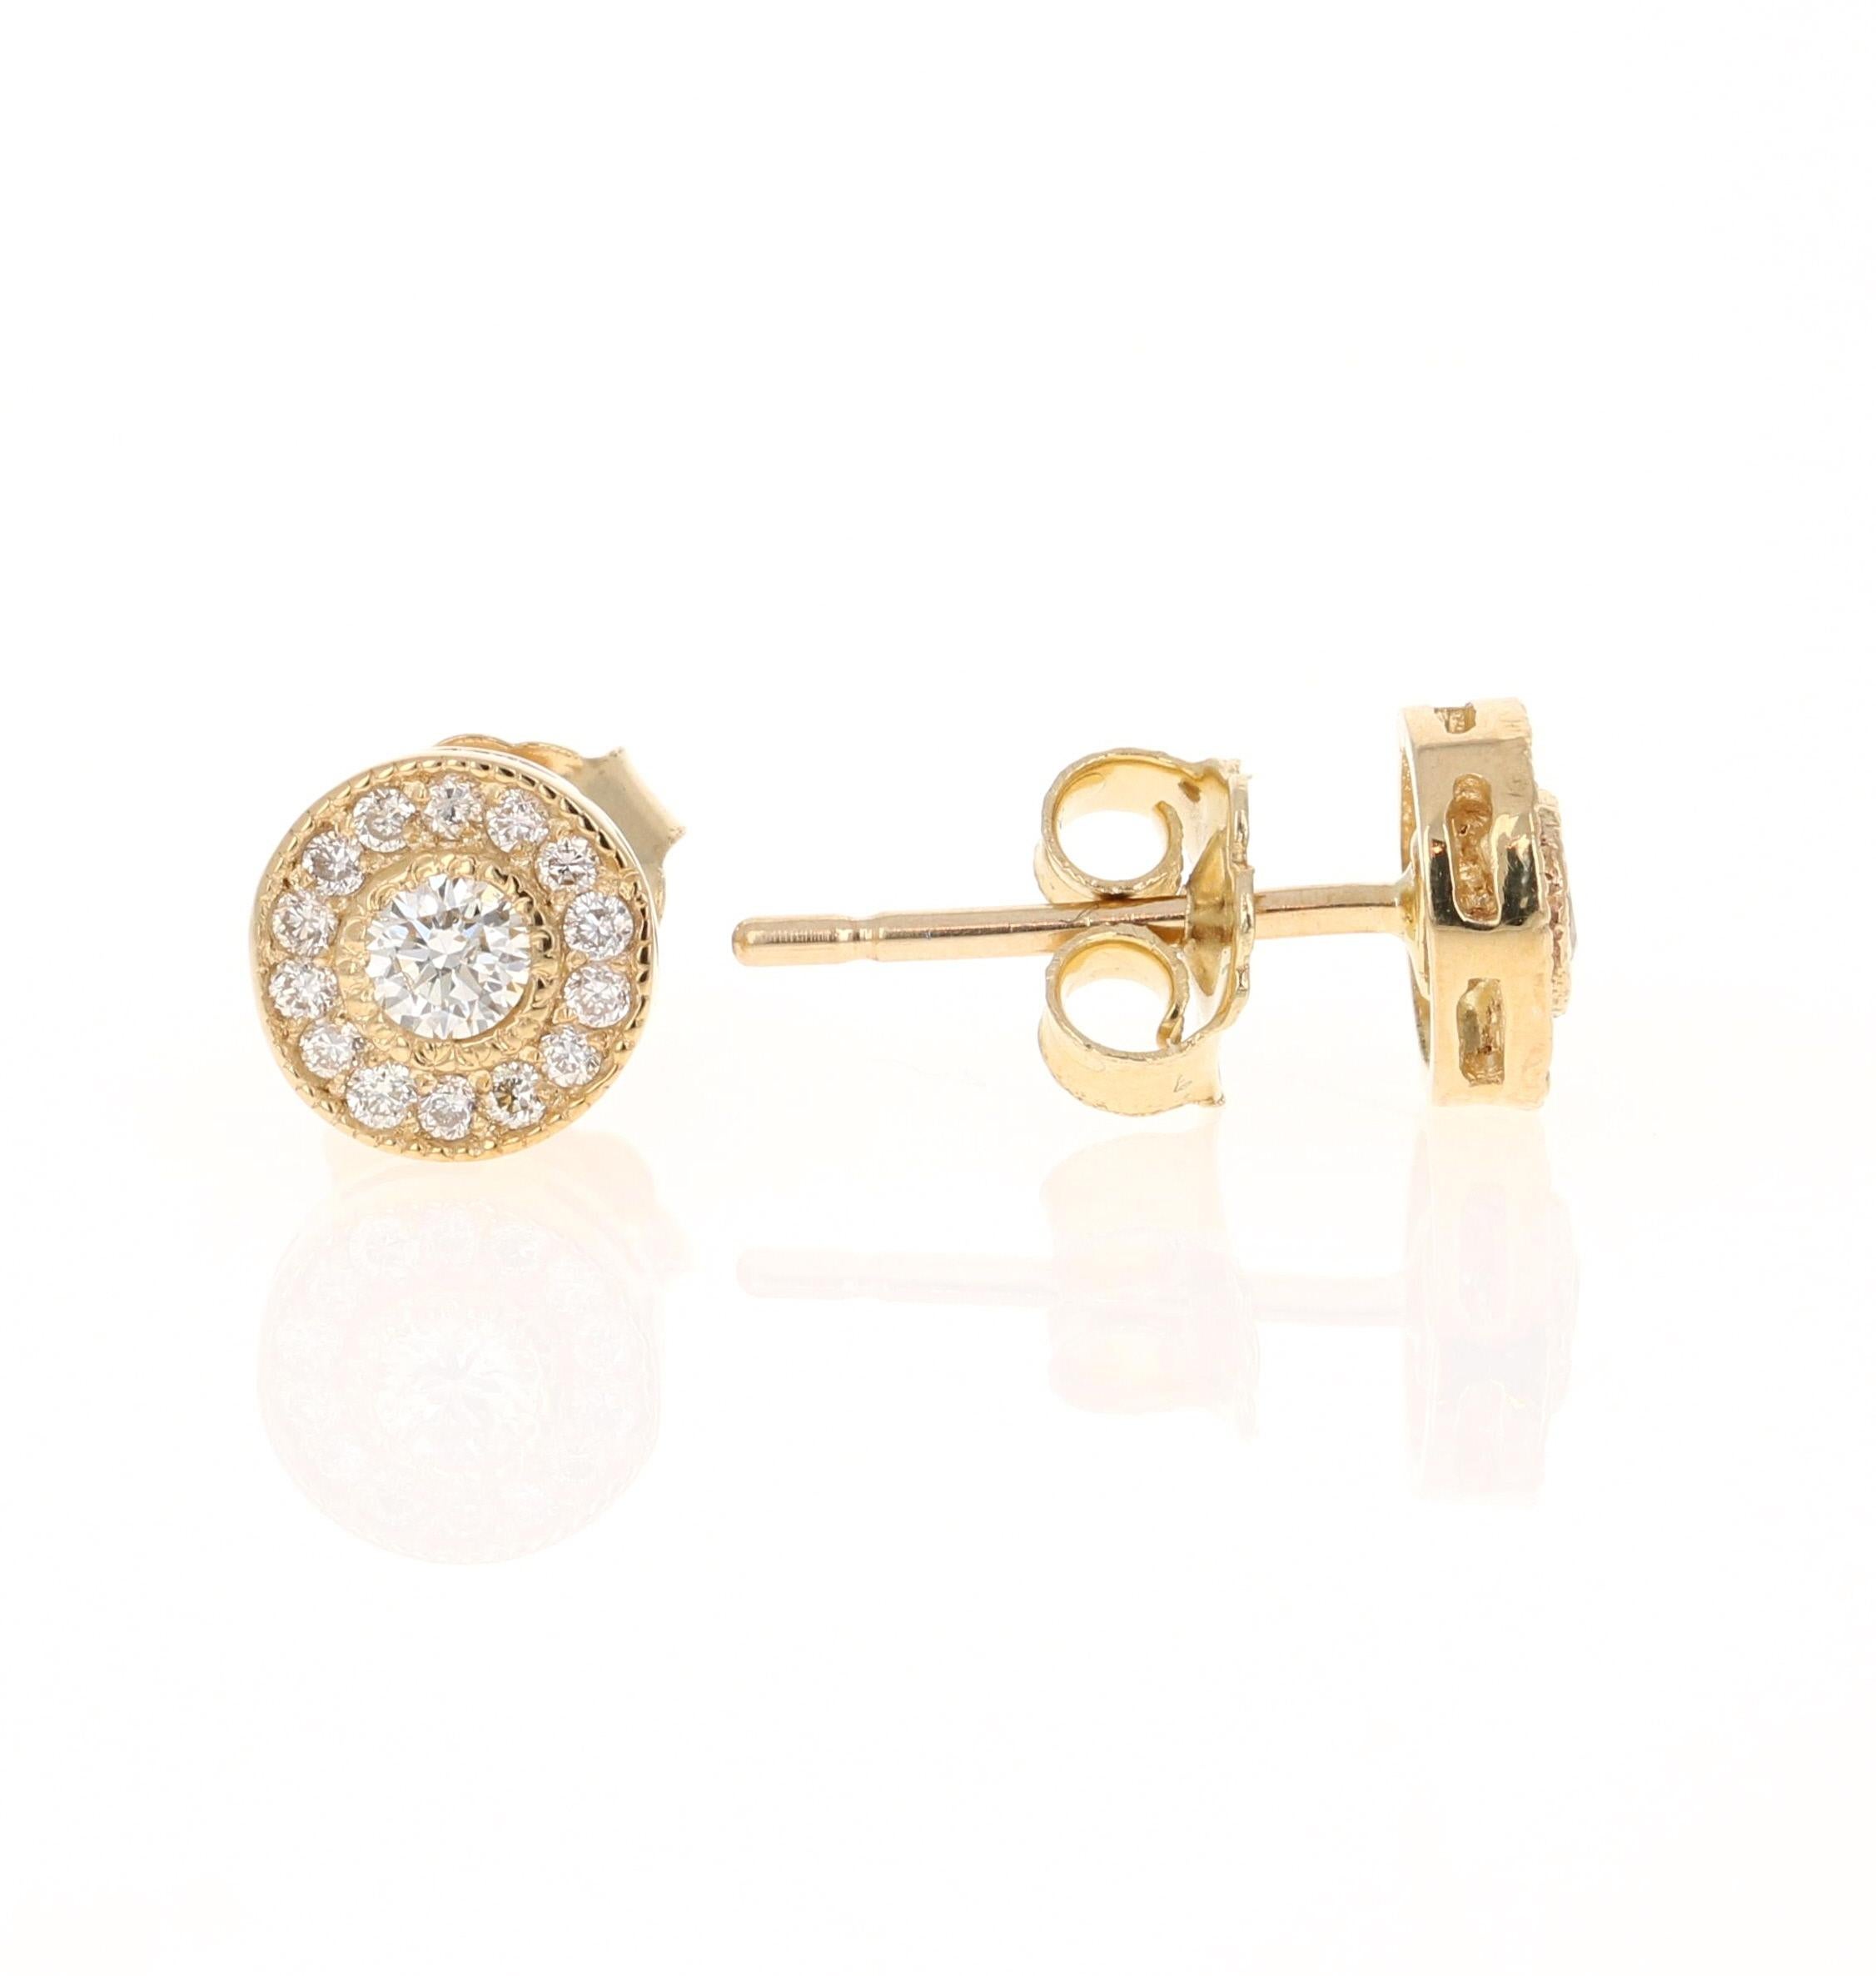 This unqiue design of diamond earrings has 30 Round Cut Diamonds that have 0.30 carats and a clarity and color of VS-H. 
They are set in 14 Karat Yellow Gold and weigh 1.2 grams

The width of the earrings are 7 mm. 



